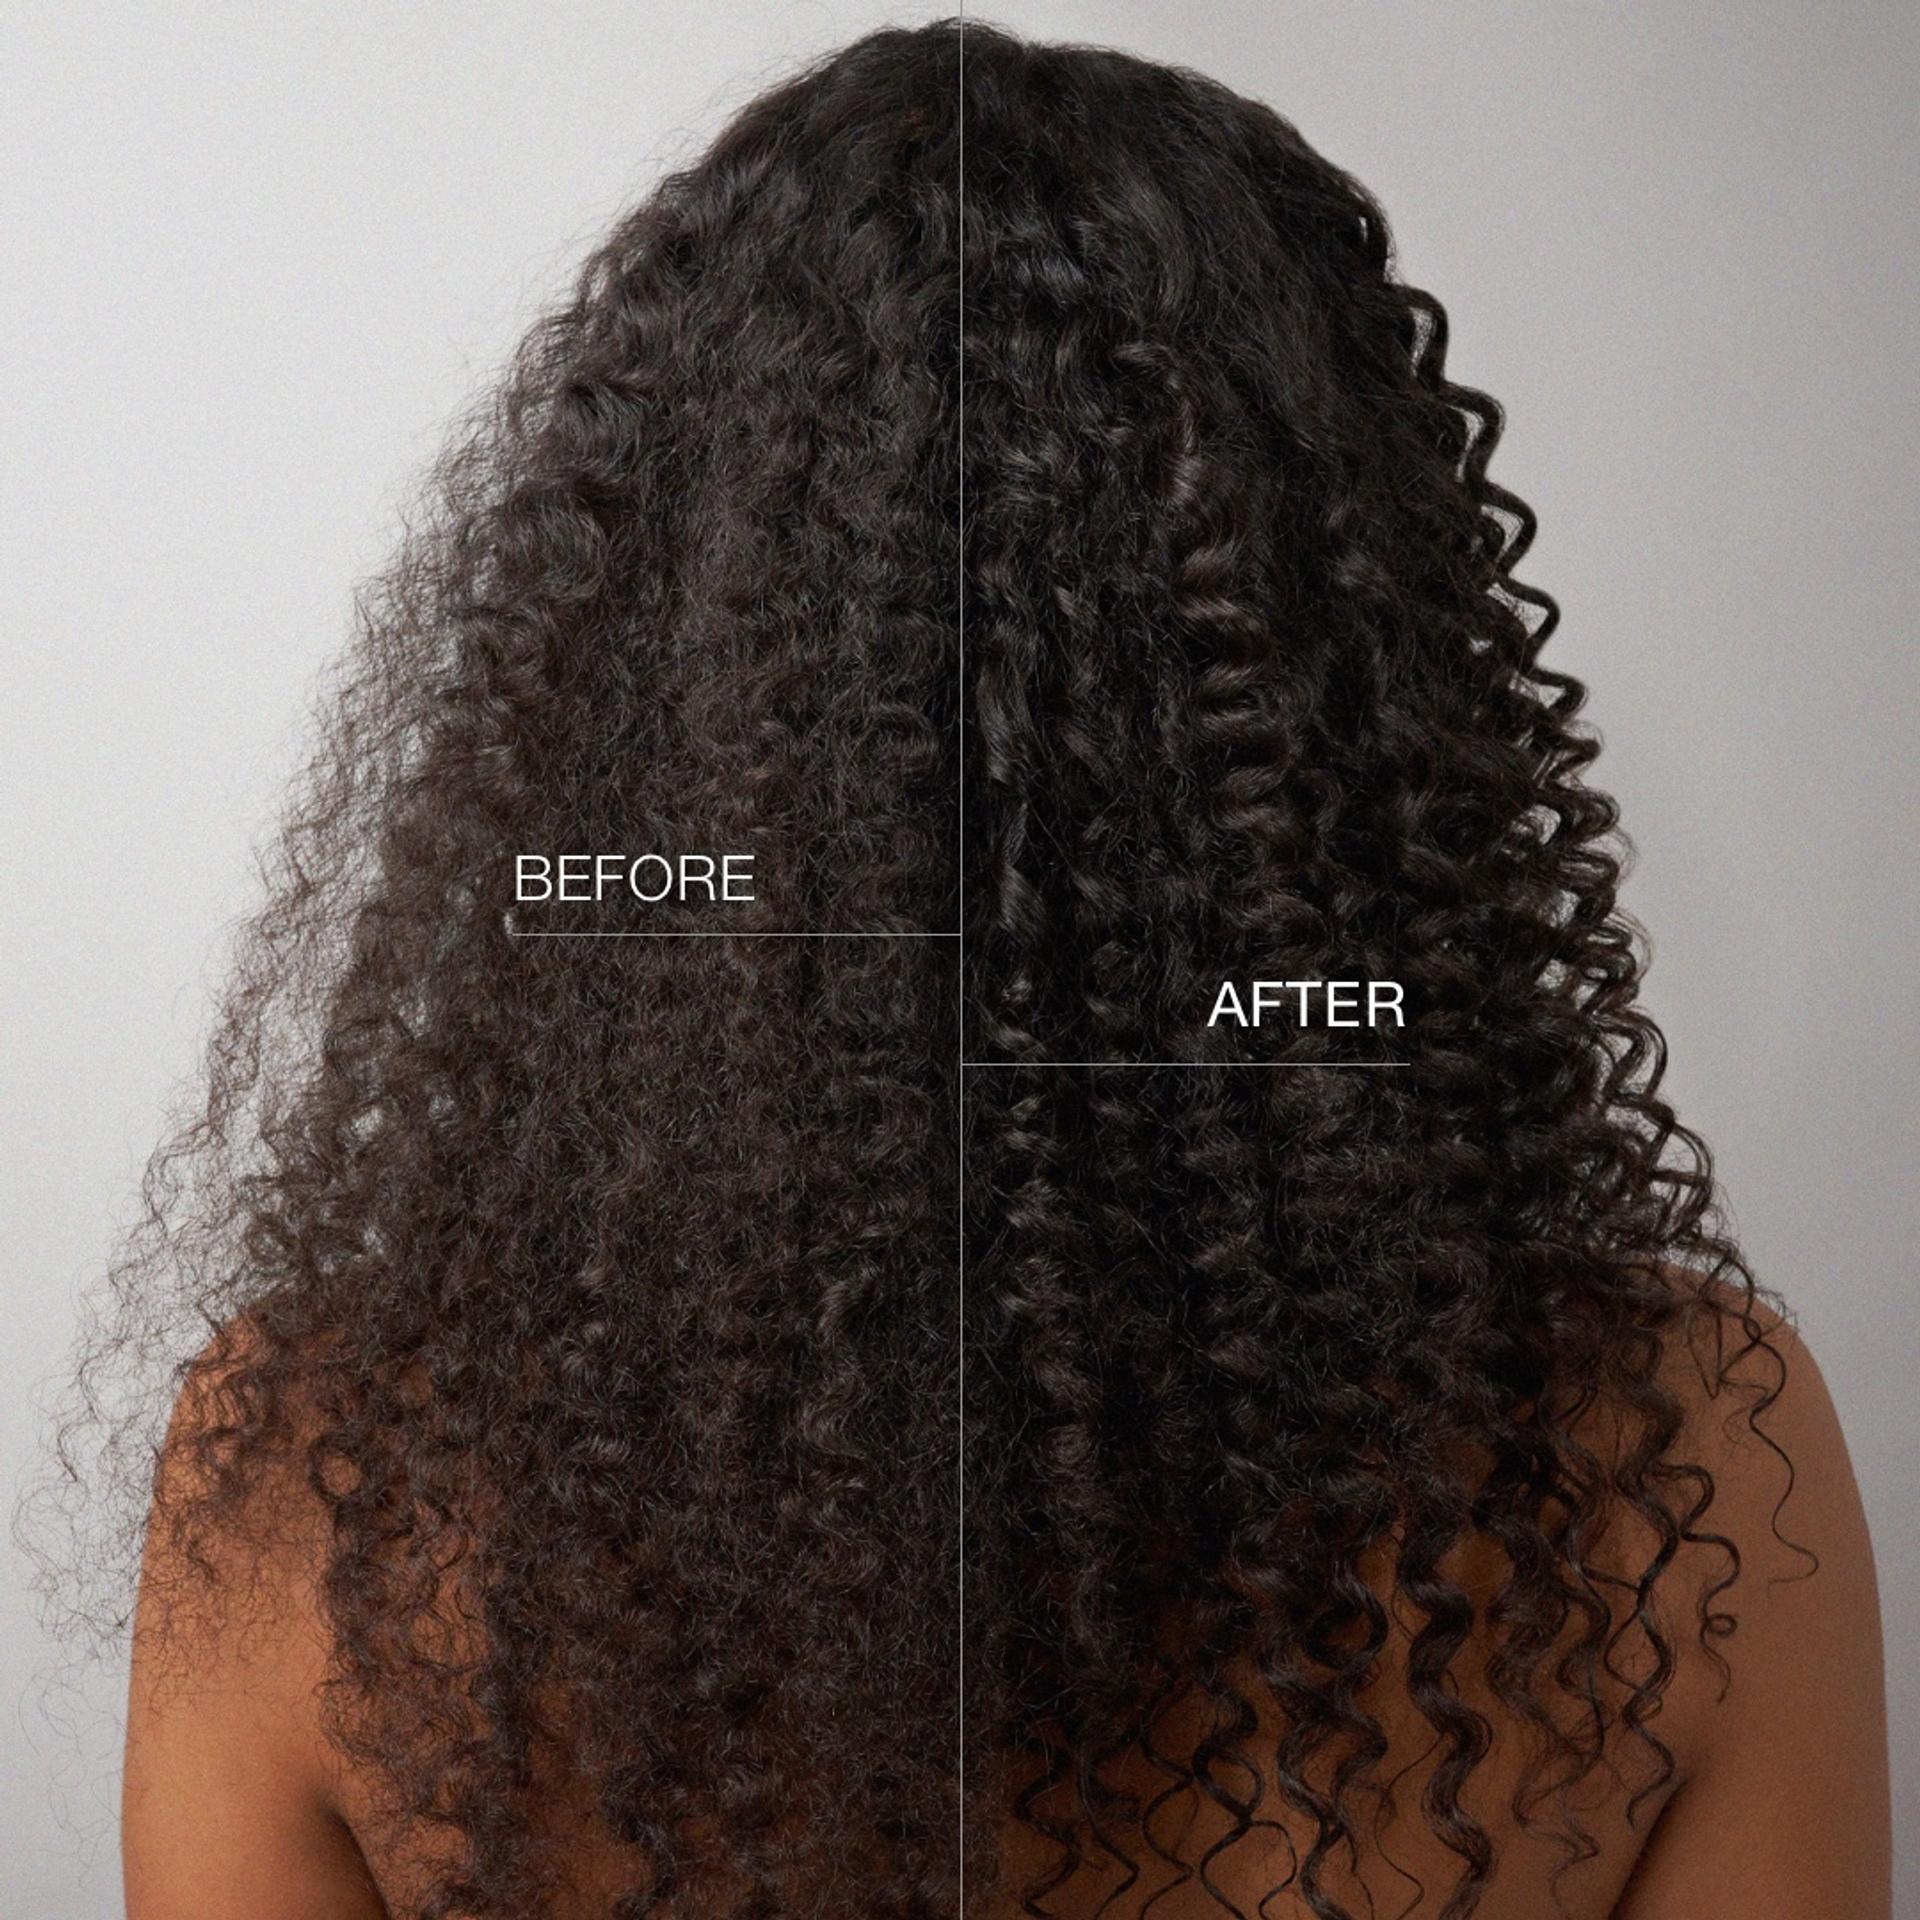 Photo of the back of a women's head and back with thick curly afro hair before and after using a weightless conditioner